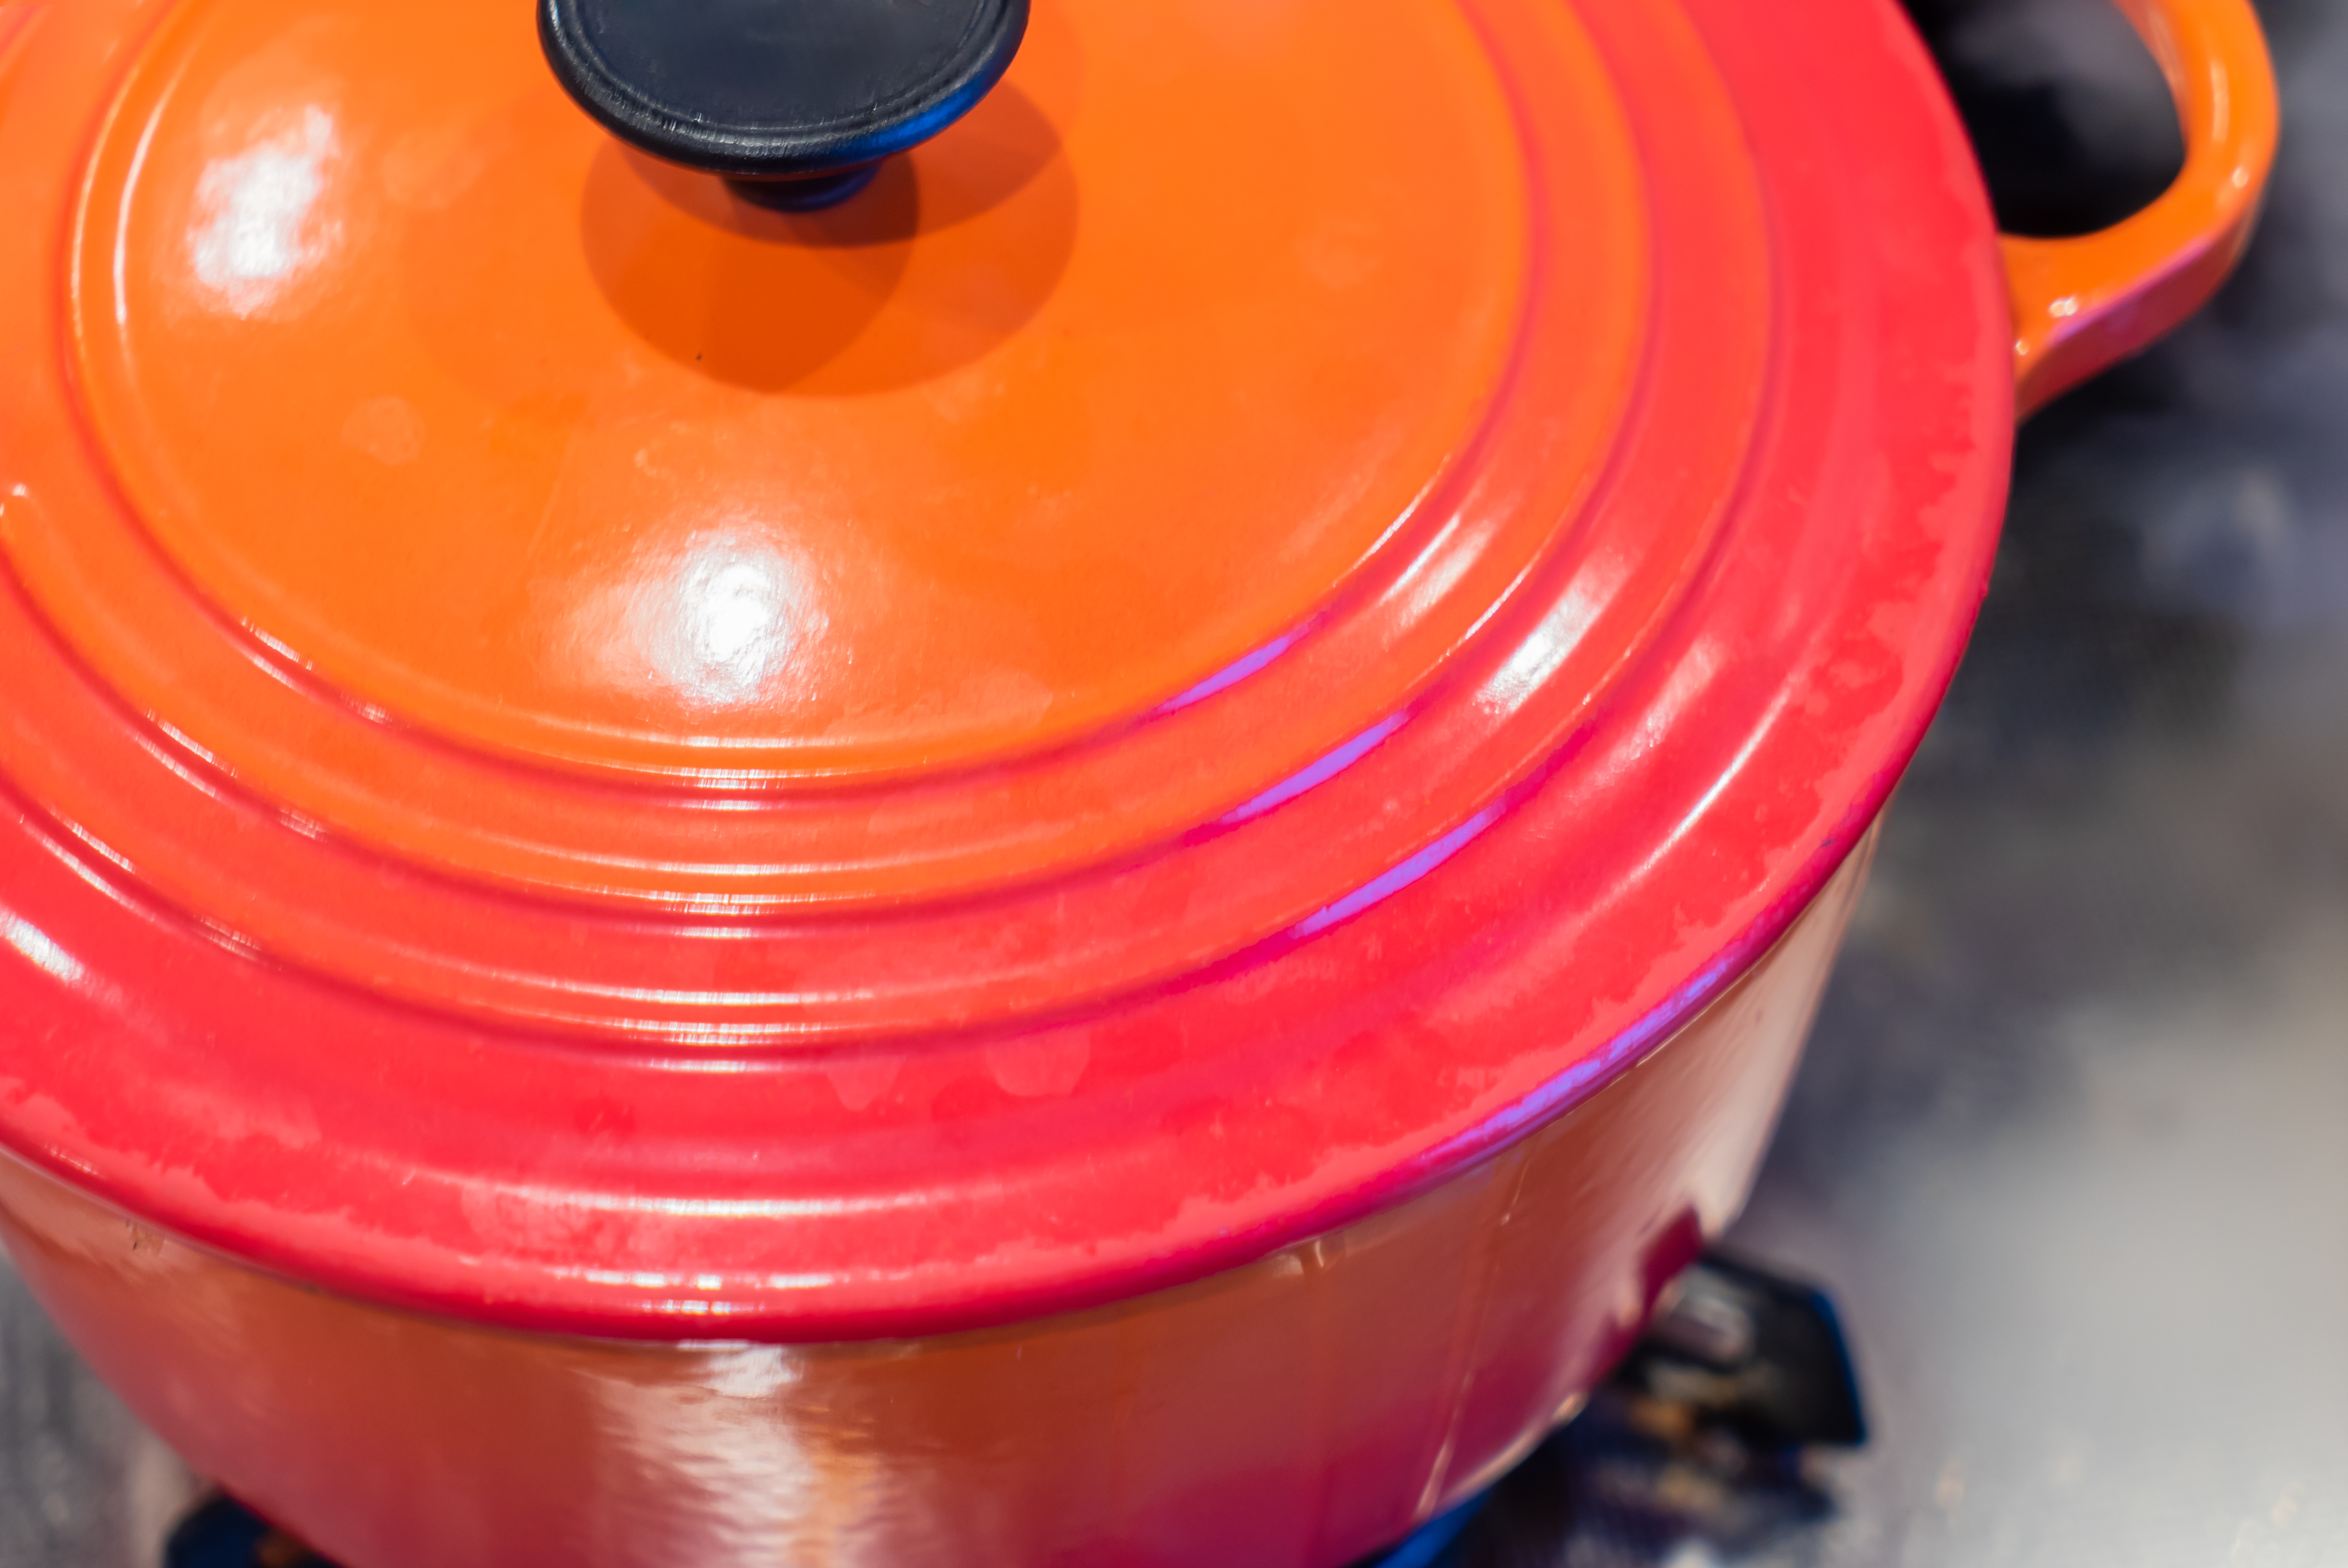 What Is Porcelain Enamel Cookware?